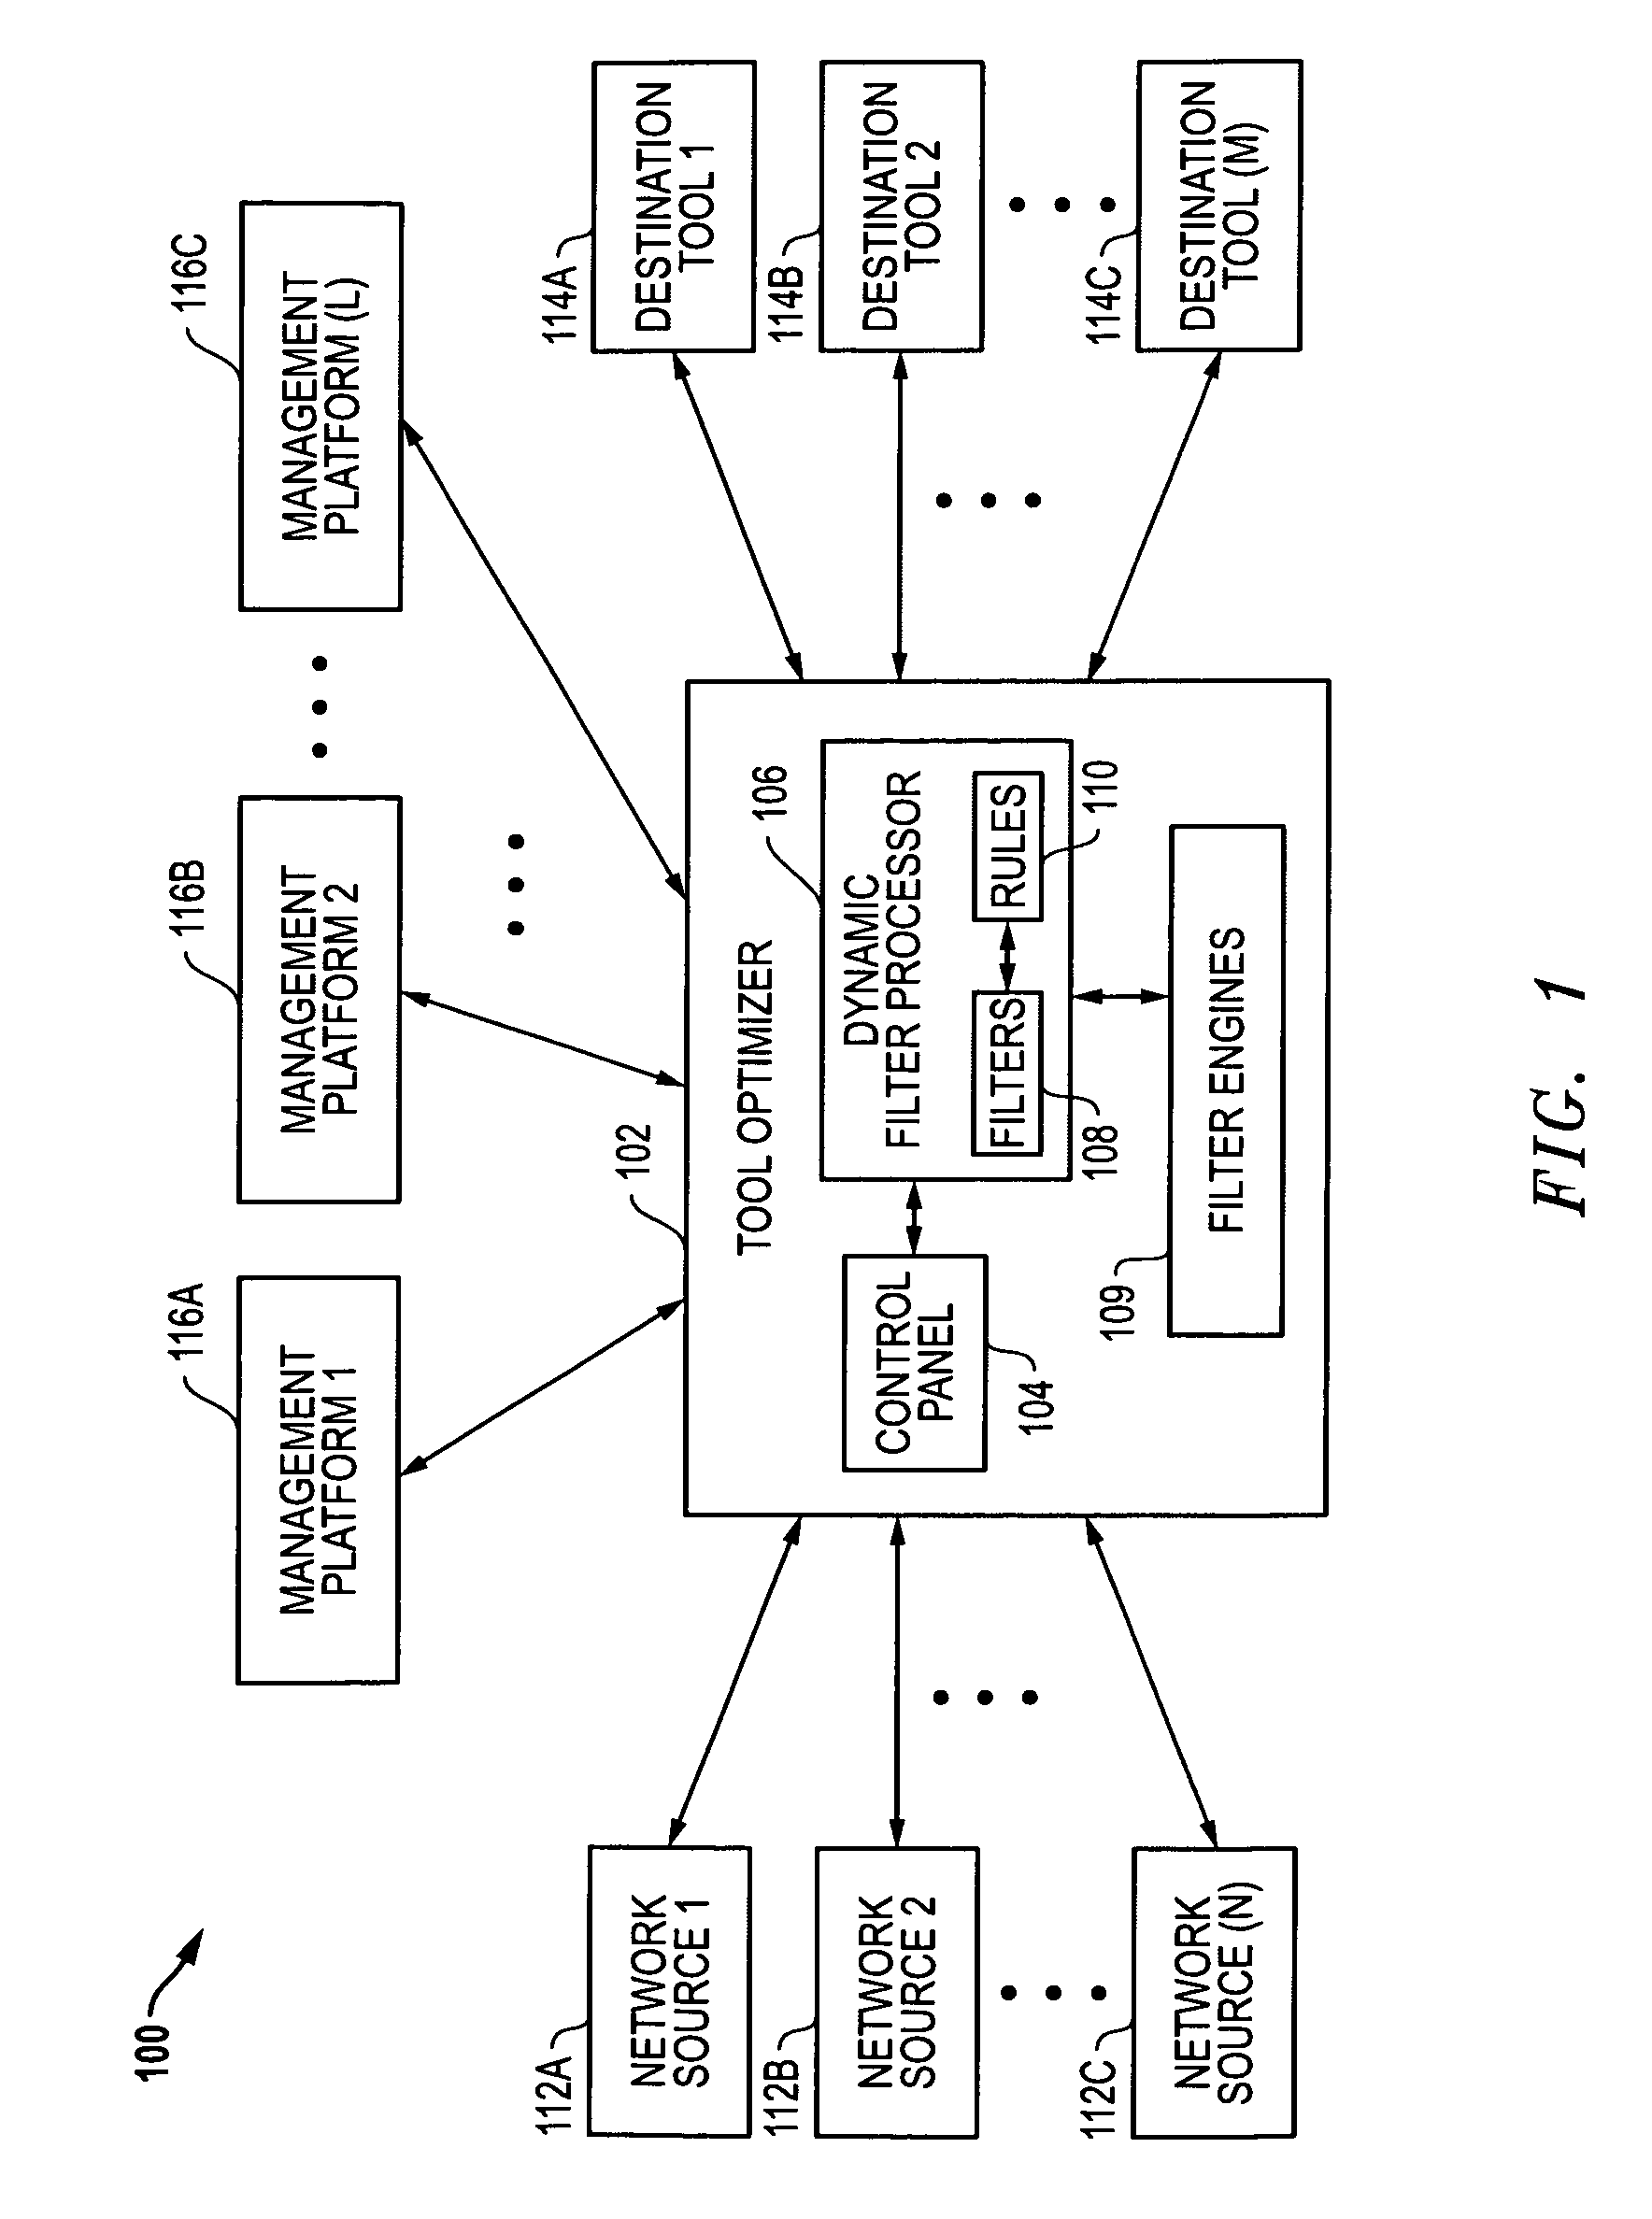 Superset packet forwarding for overlapping filters and related systems and methods